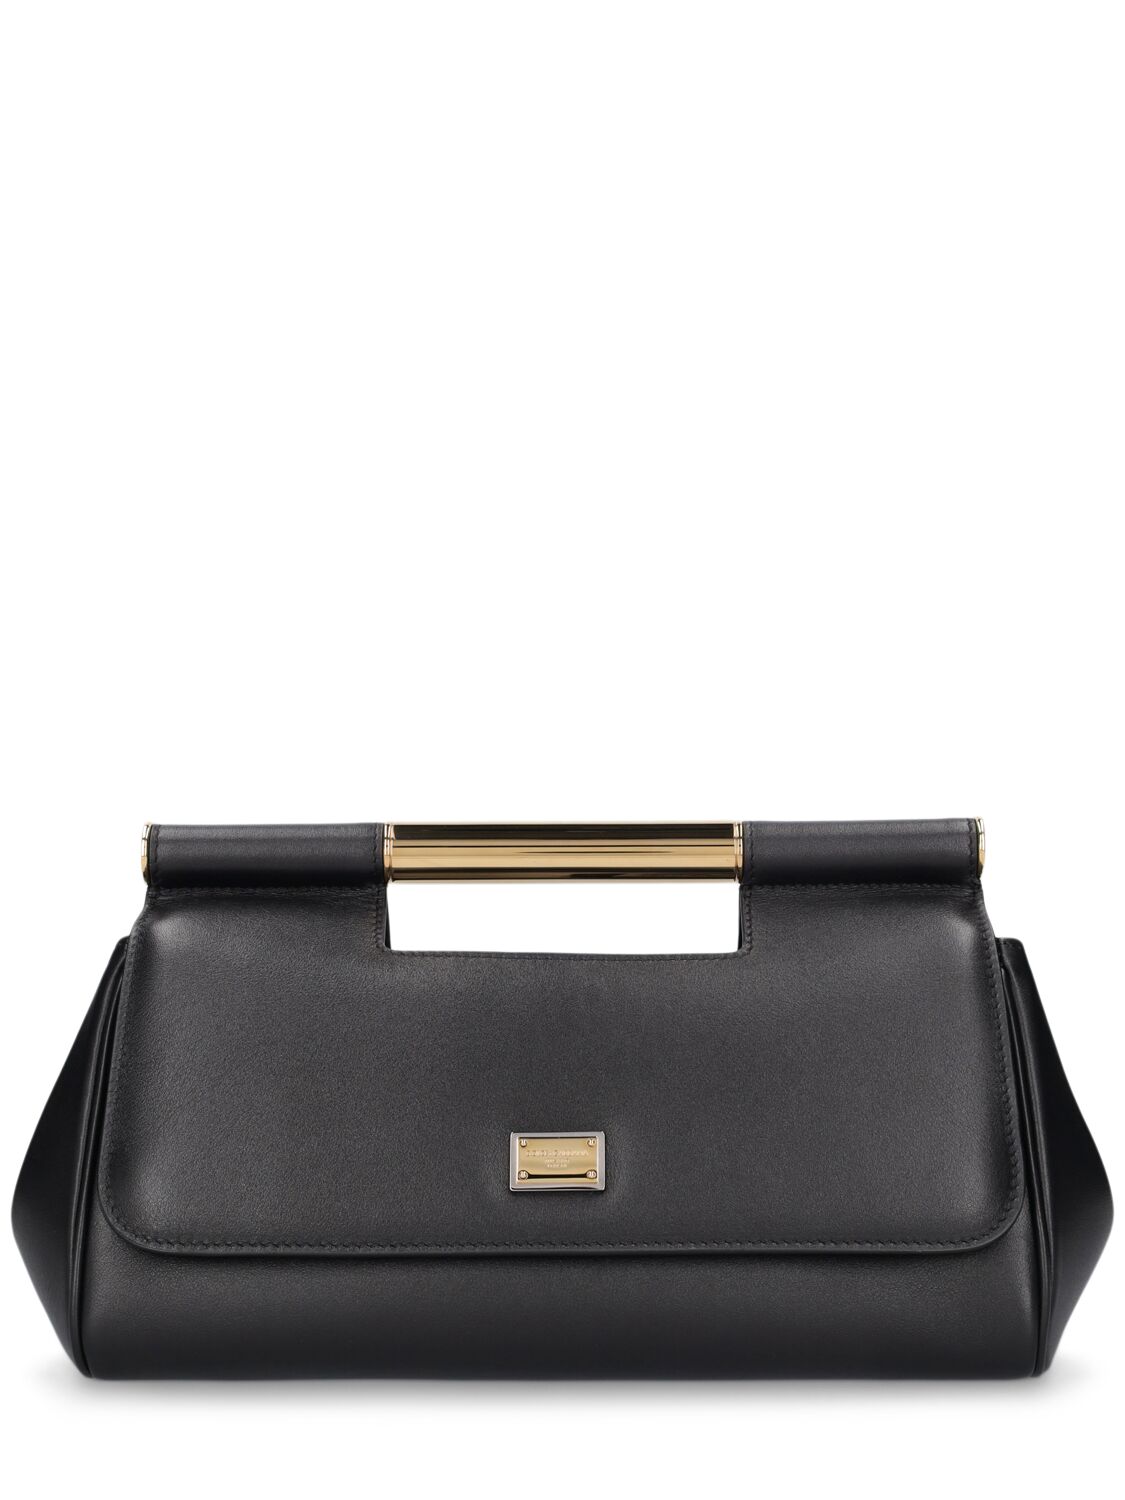 Dolce & Gabbana Sicily Elongated Leather Top Handle Bag In Black